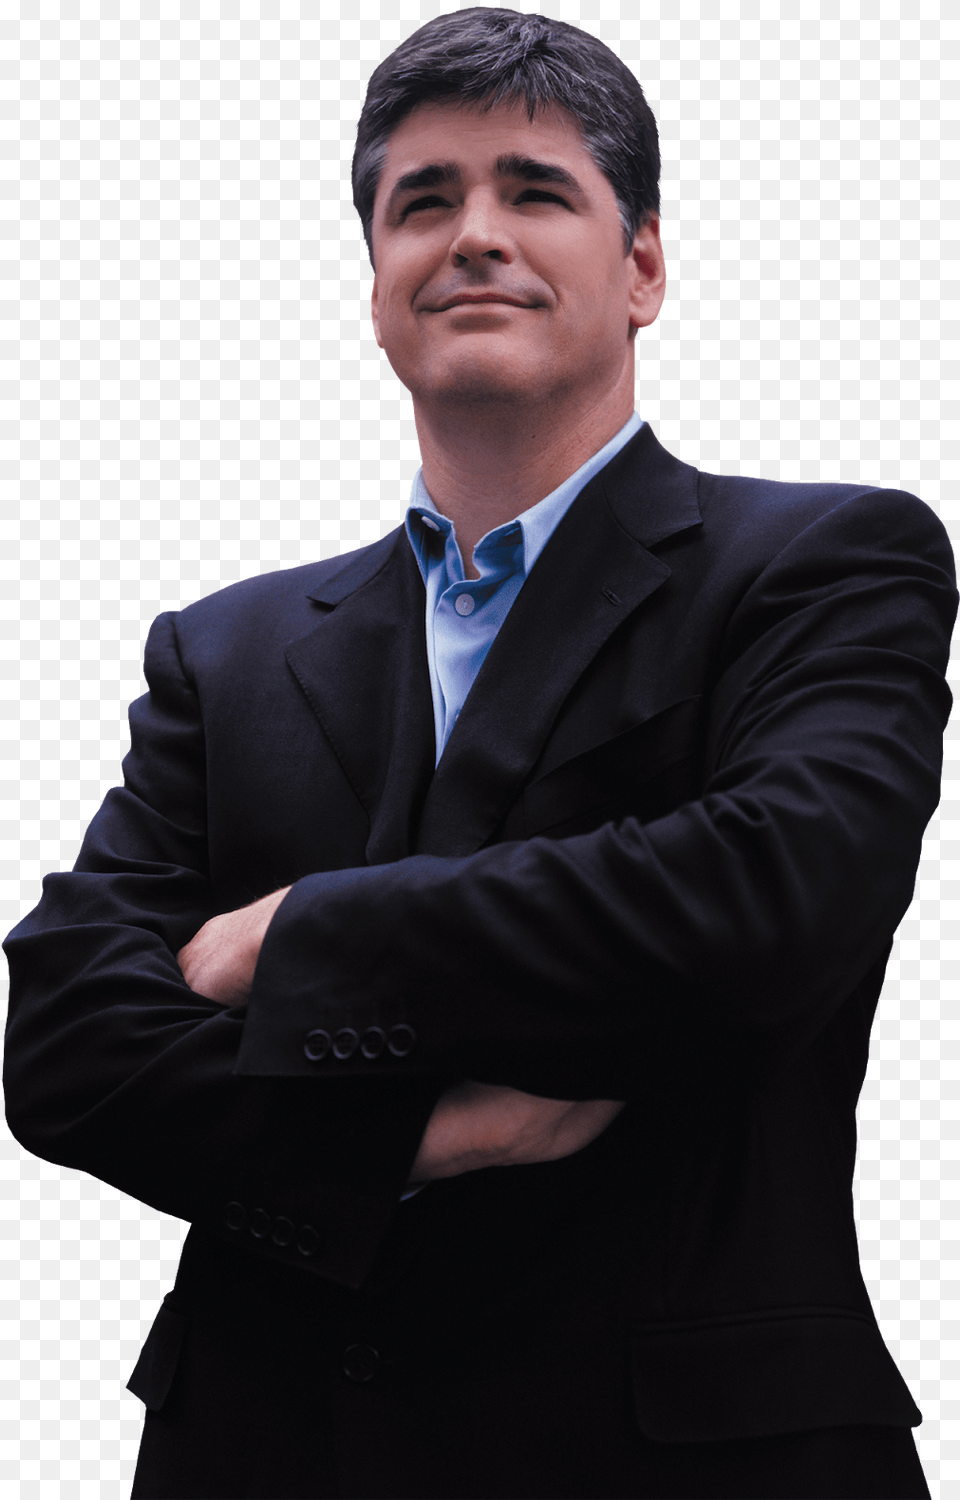 He Is A Man Left Behind By The Times Unable Or Unwilling Sean Hannity Transparent, Accessories, Tie, Suit, Portrait Png